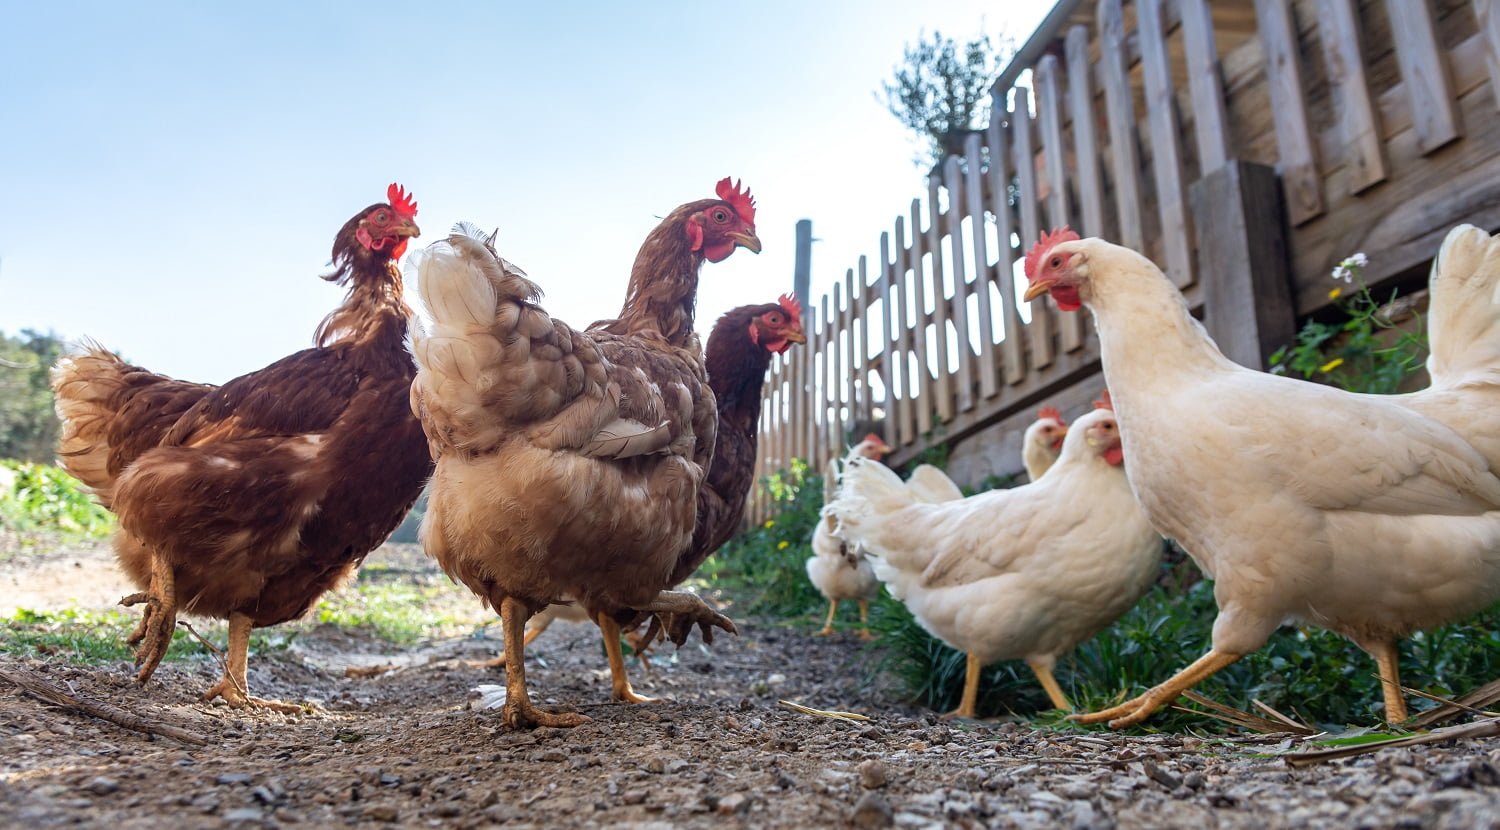 Hens raised in freedom and fed with organic food,Hens roosters and chickens